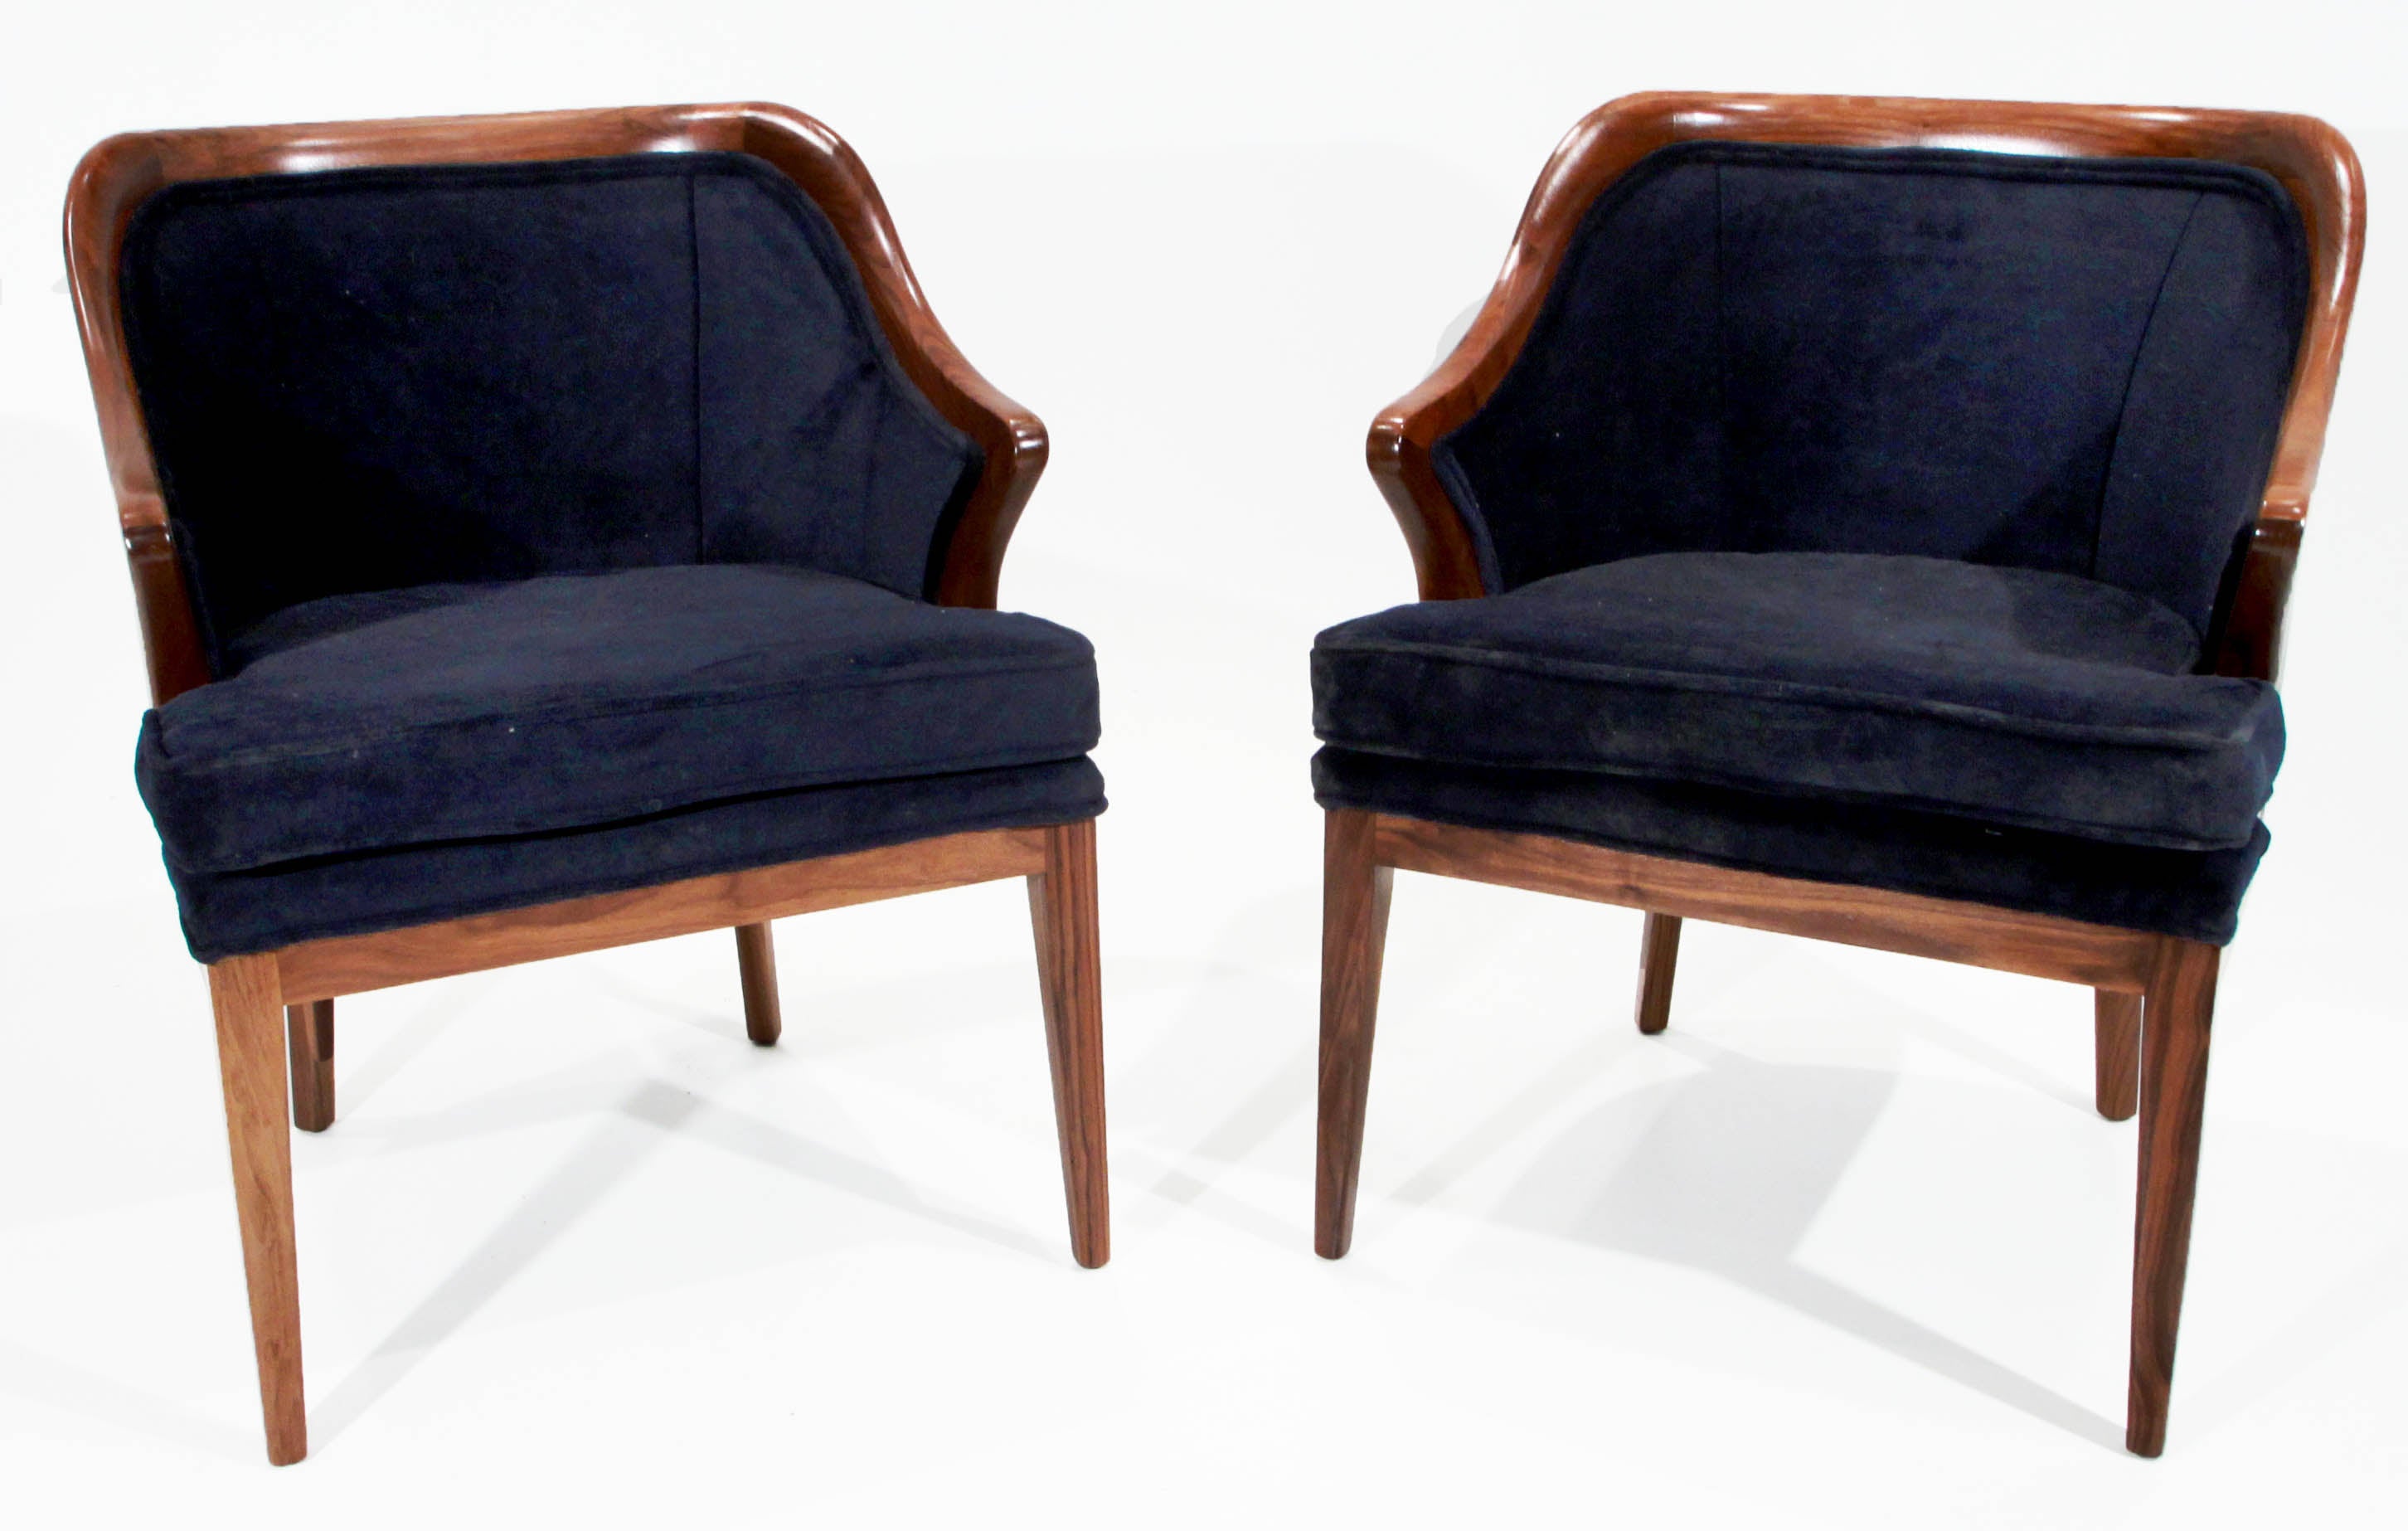 Mid-Century Harry Lunstead Walnut Sculptural Armchairs in Navy Mohair For Sale